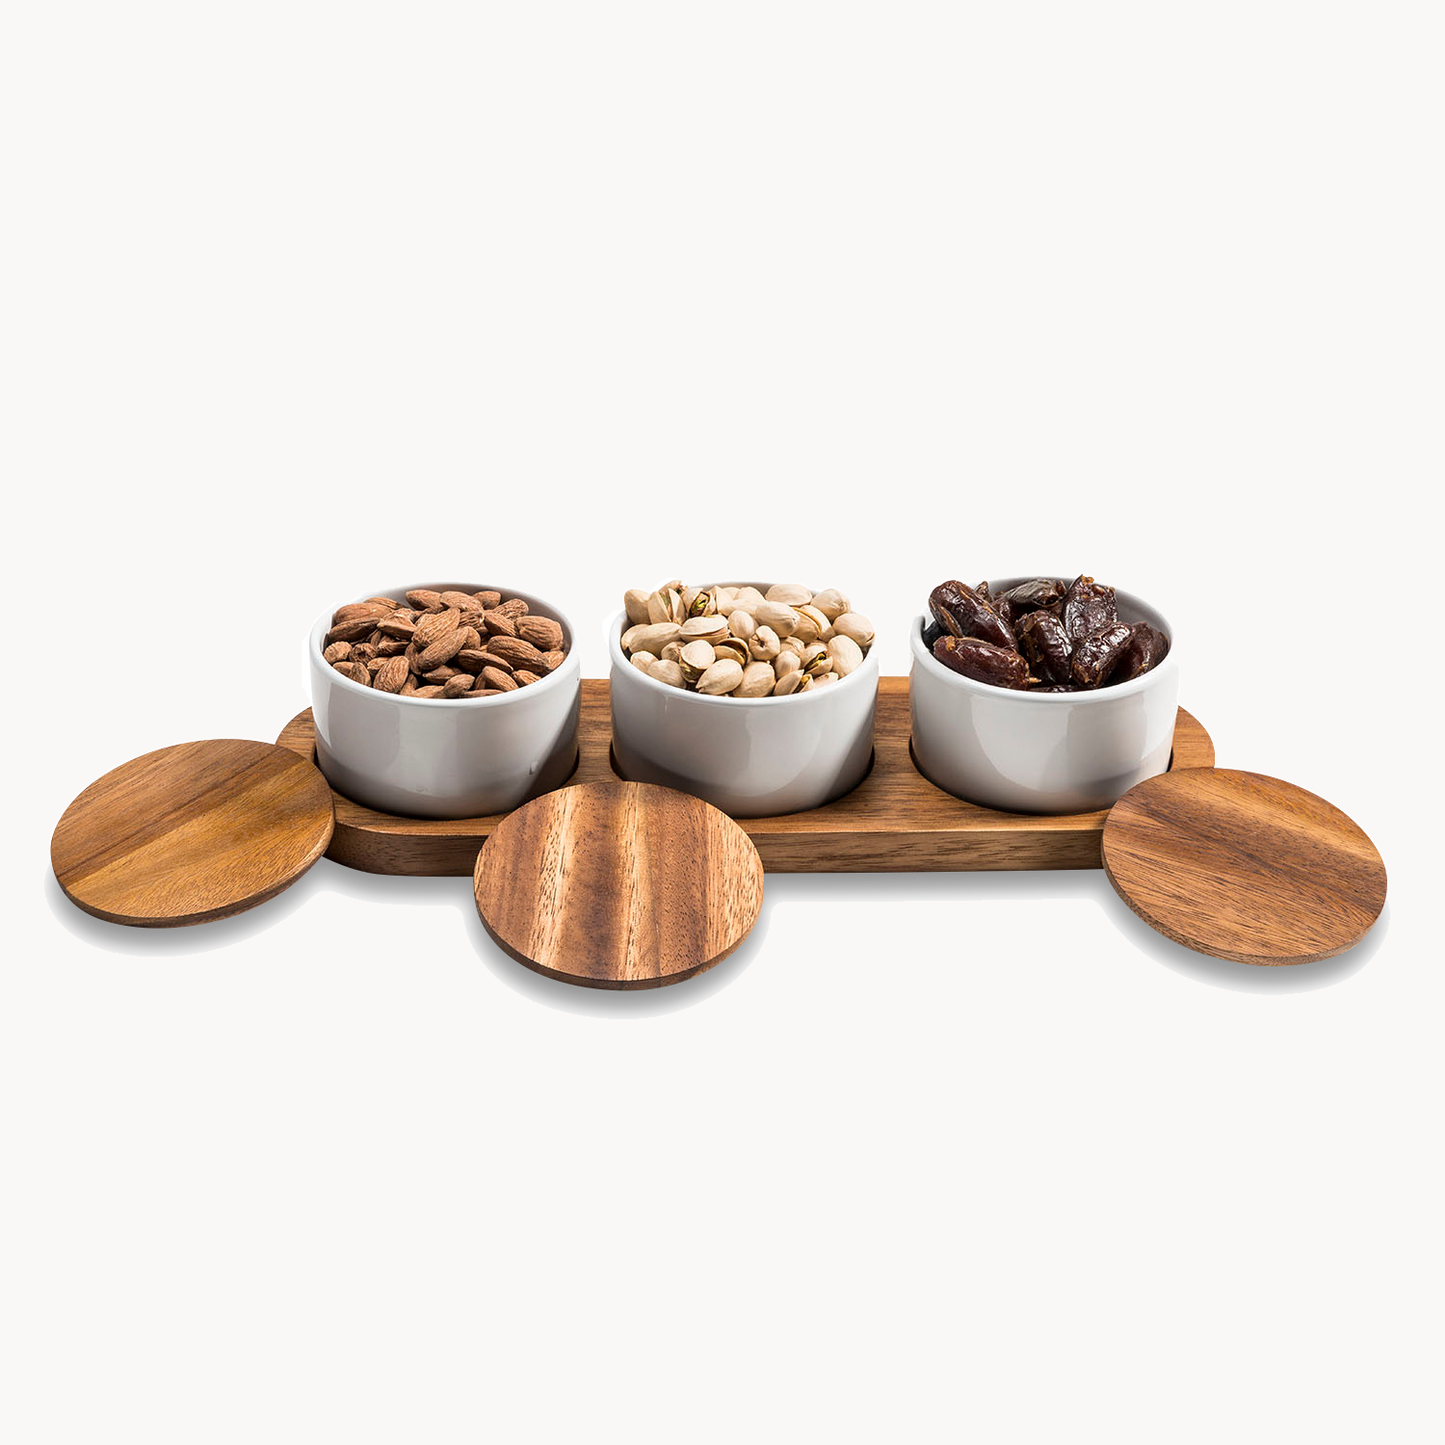 Round White Condiment Bowls With Lids and Acacia Wood Serving Tray | Ceramic Set